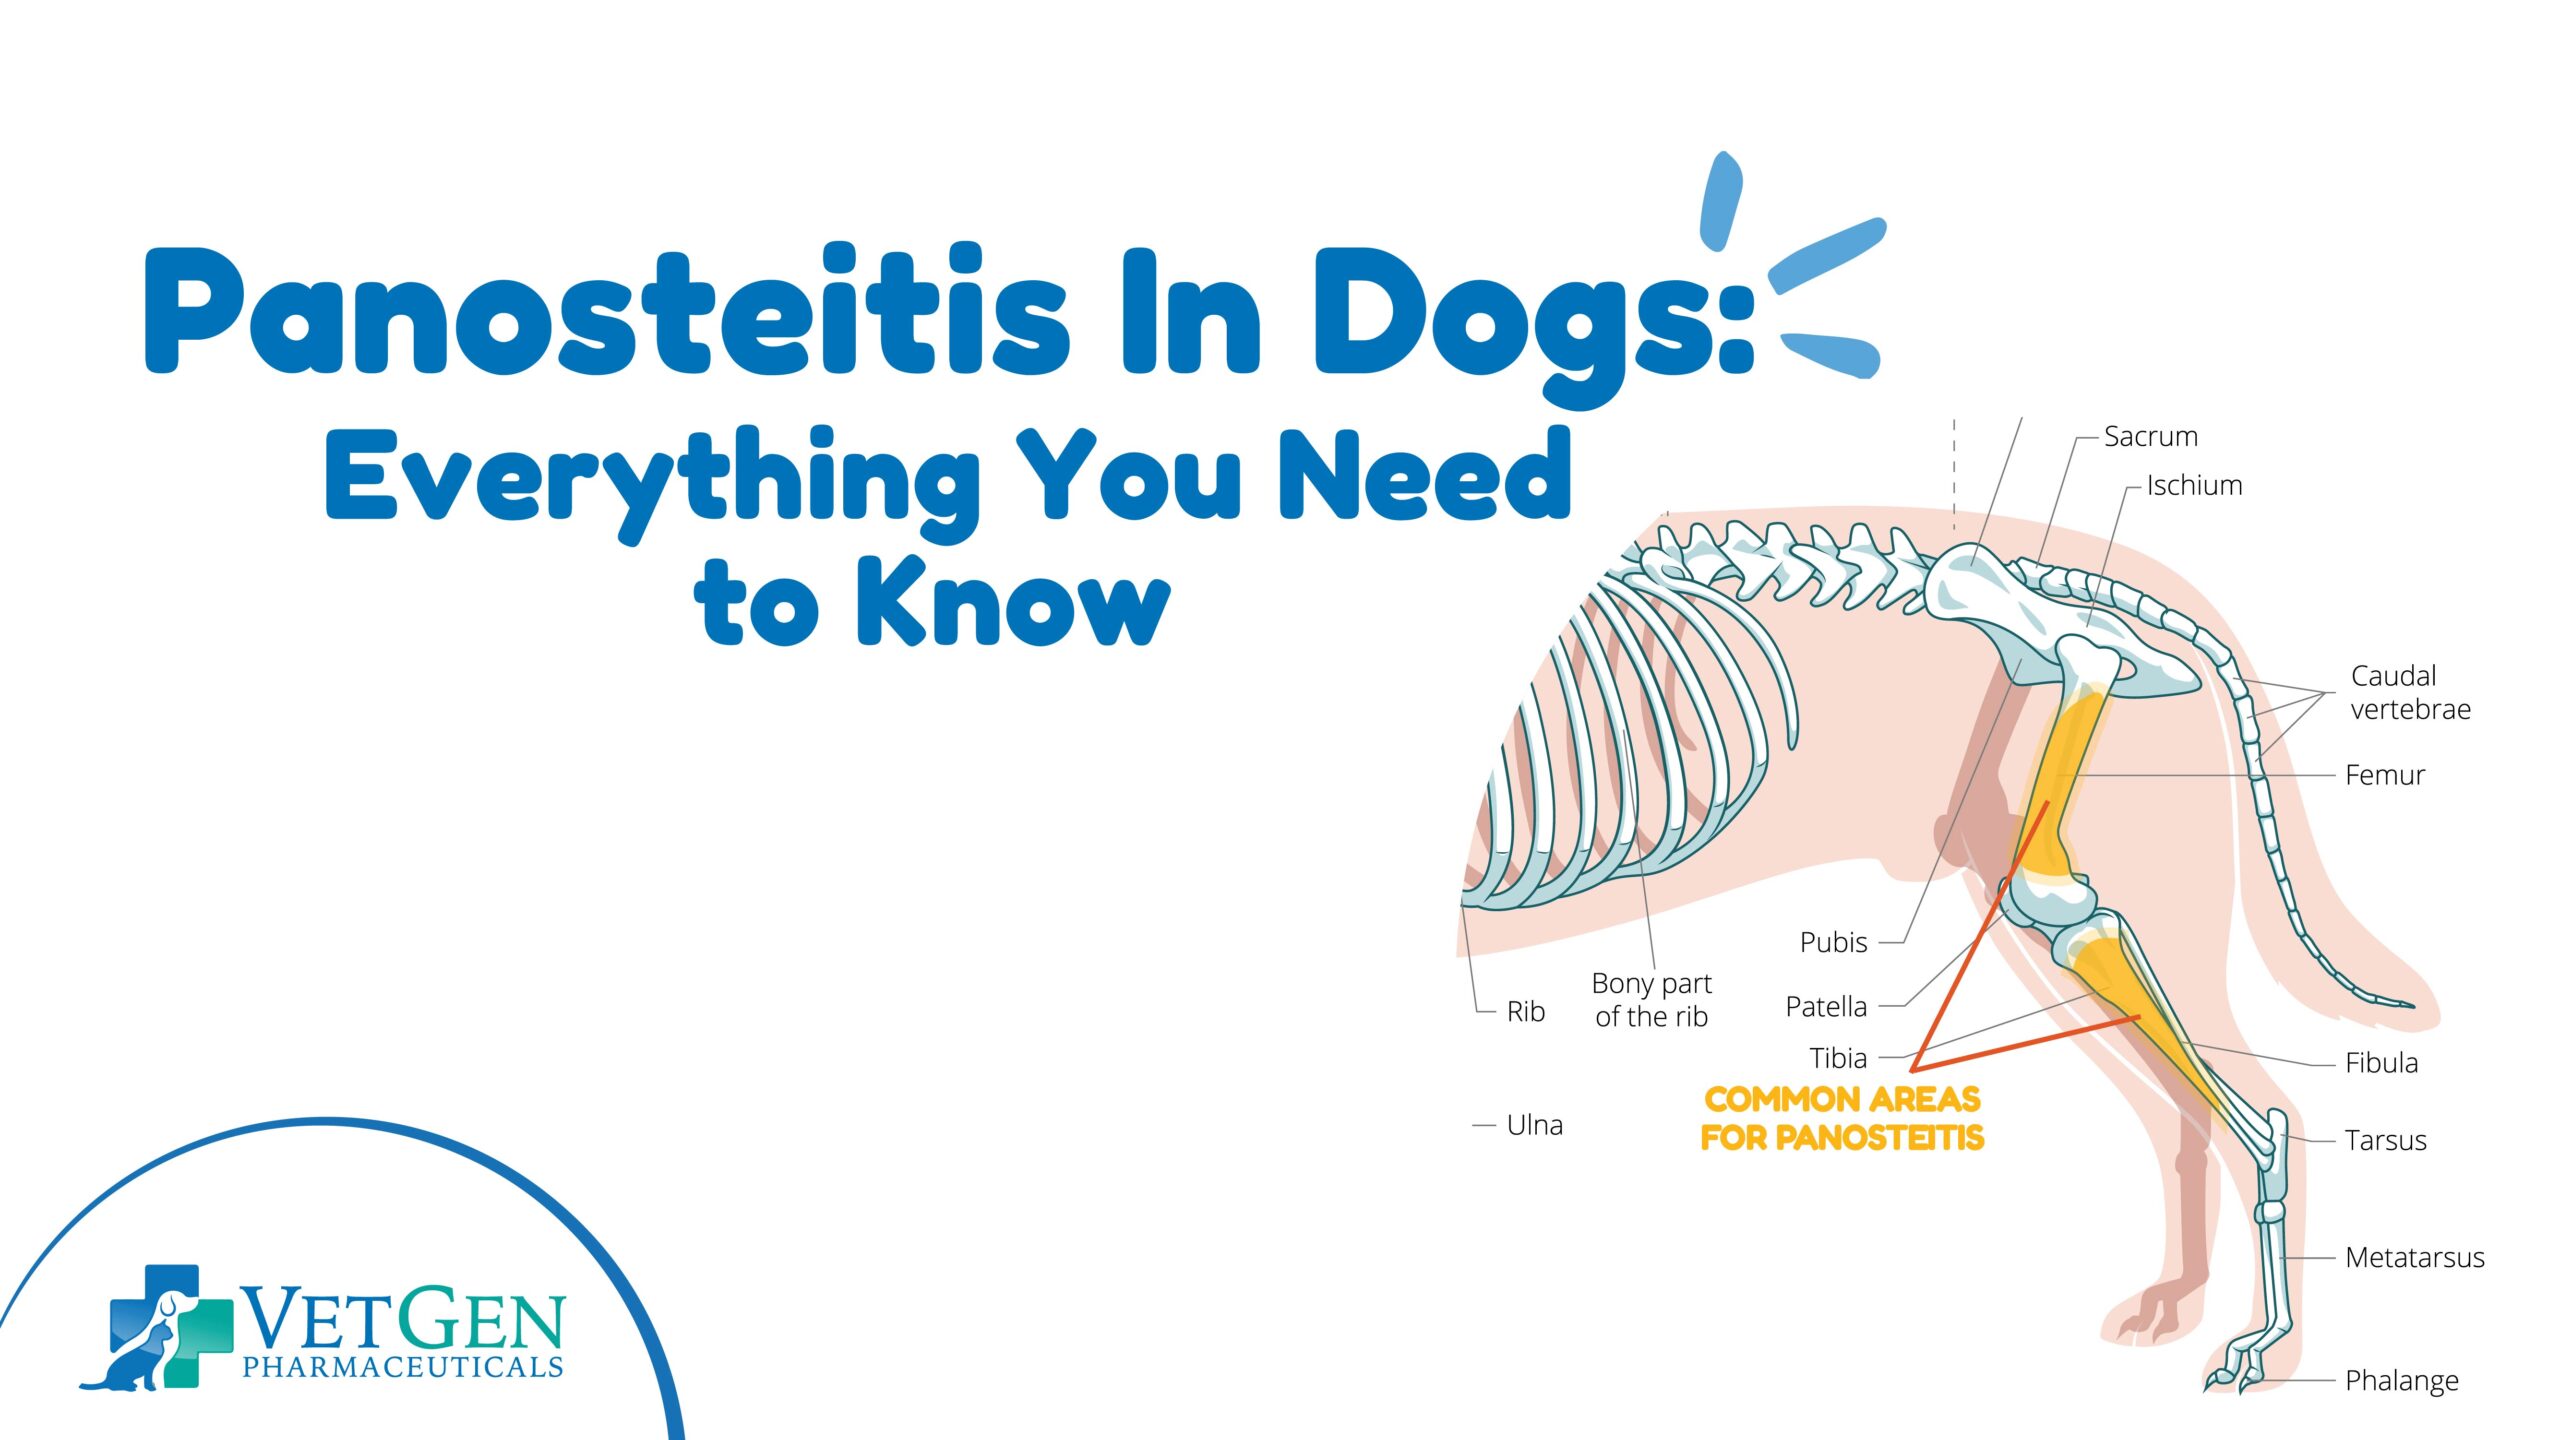 Panosteitis In Dogs – Everything You Need to Know